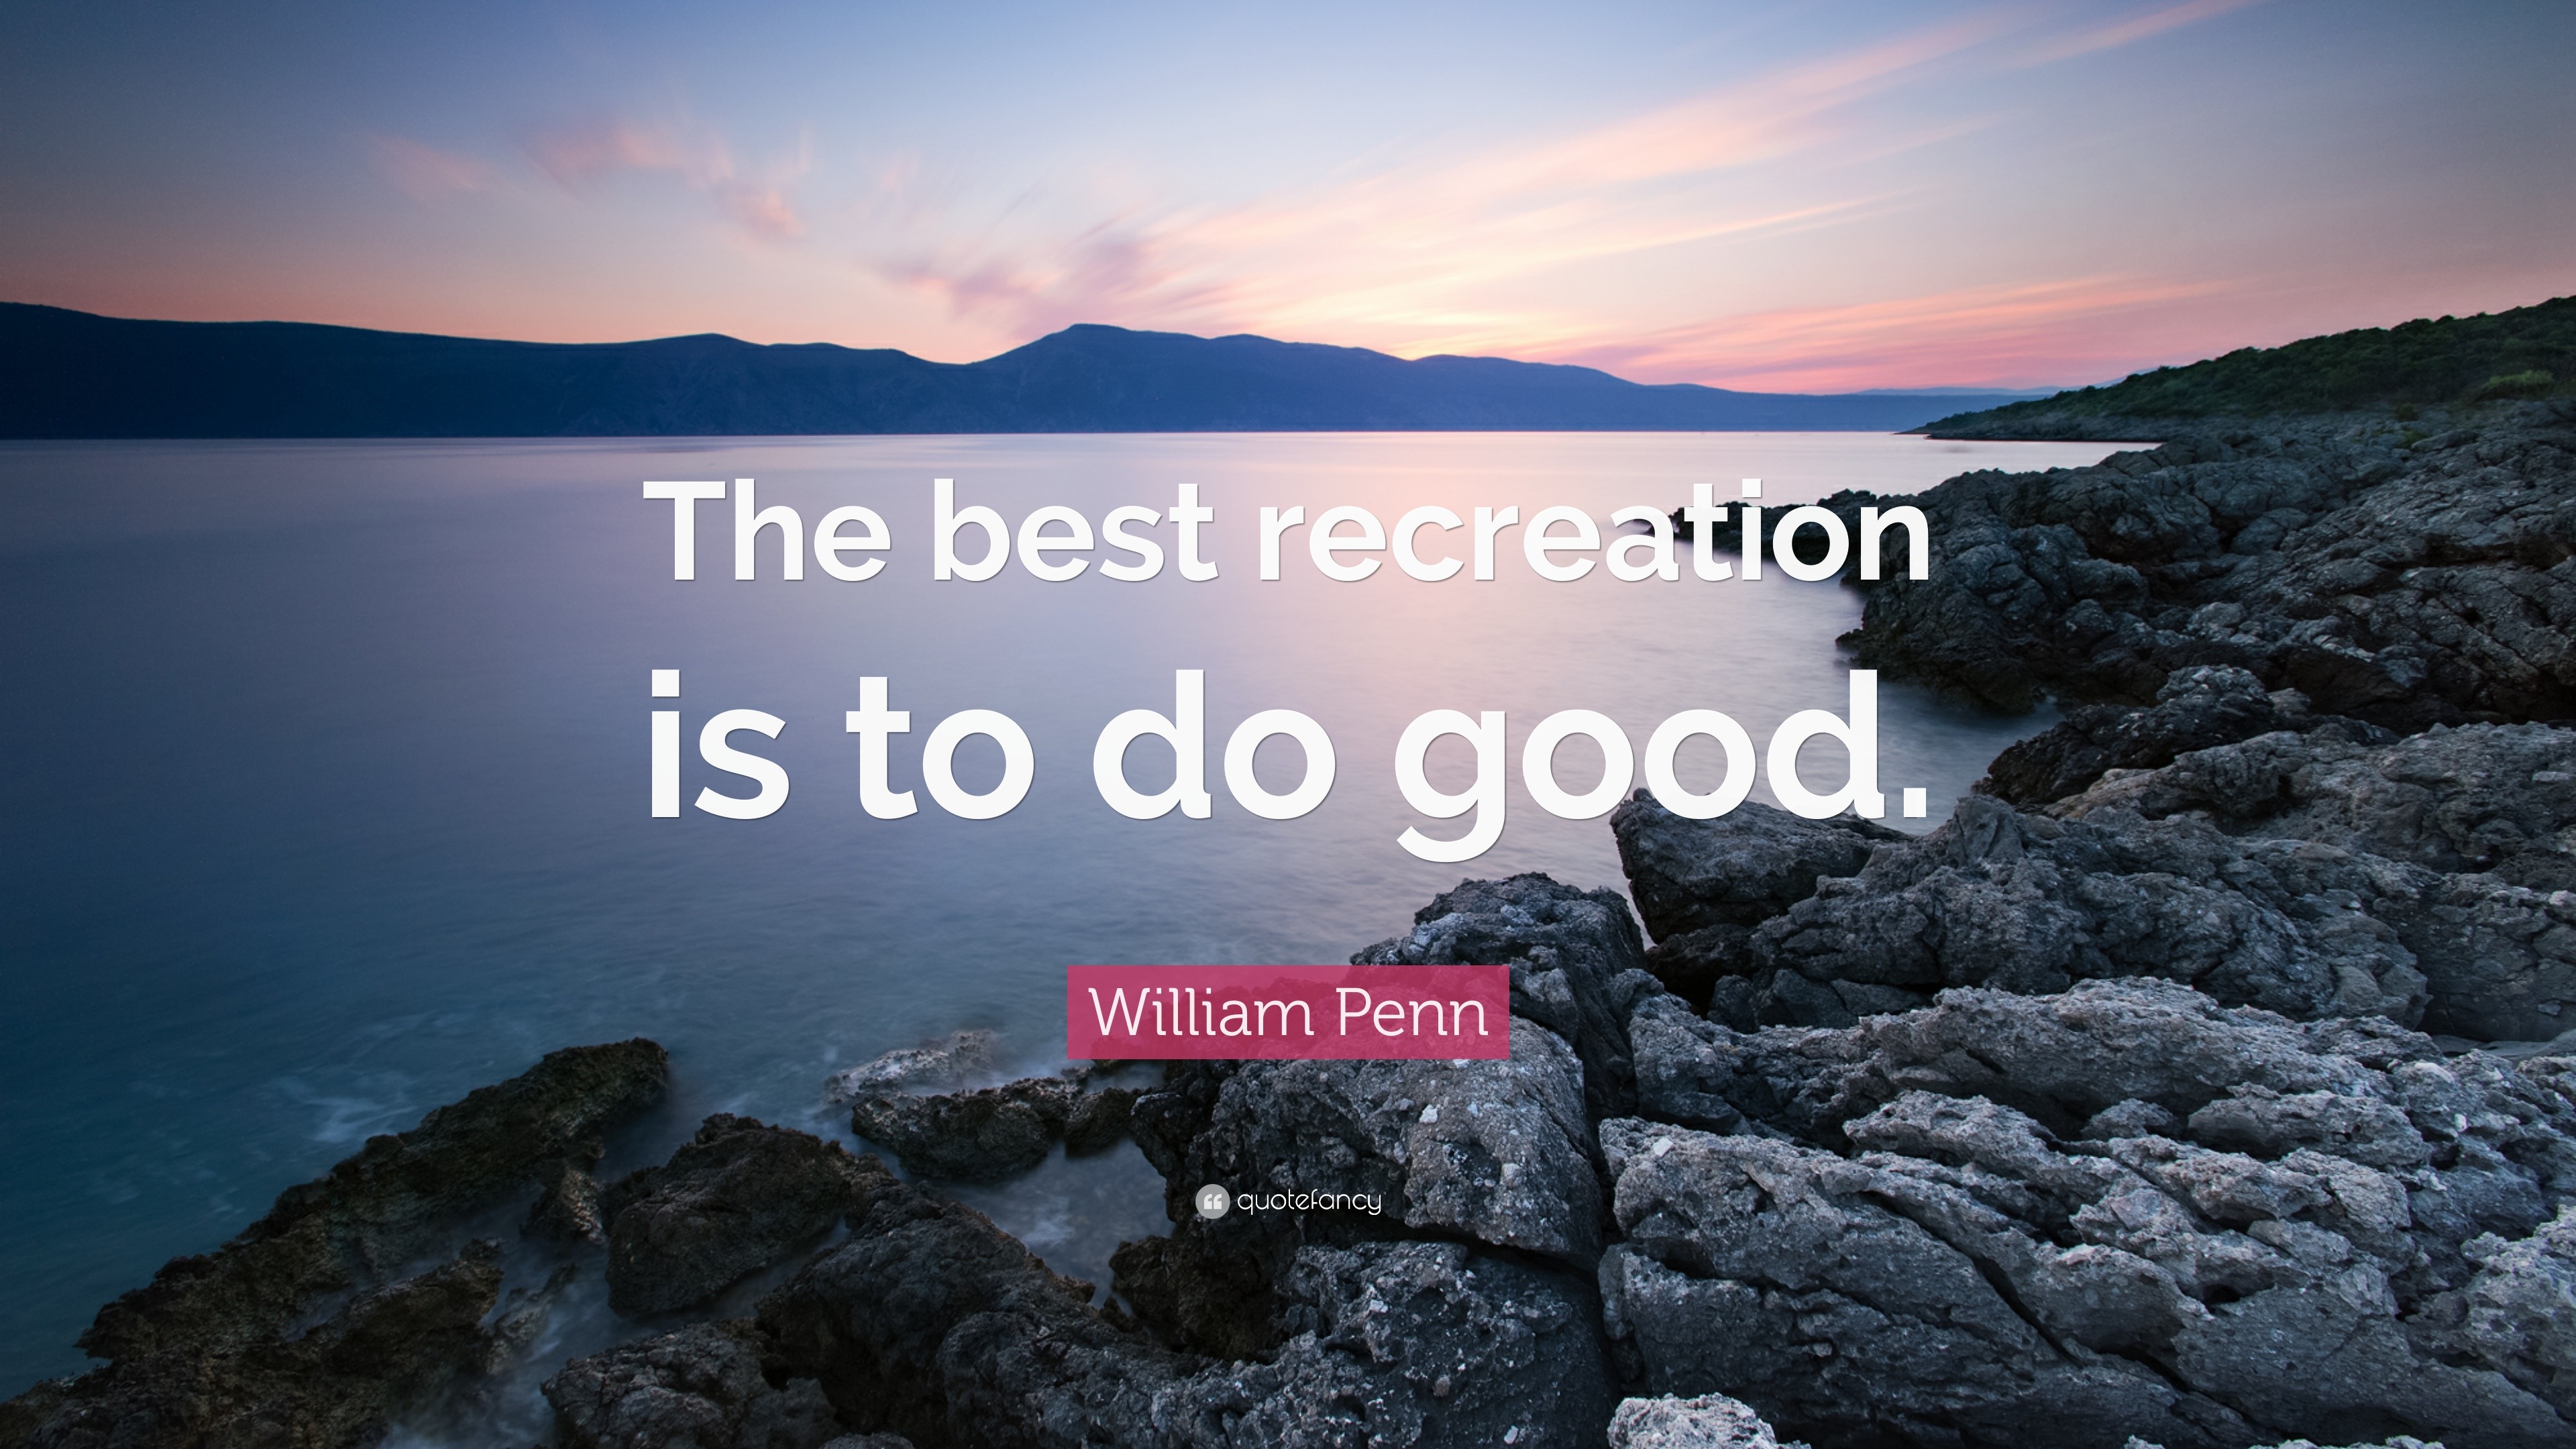 Image result for “The best recreation is to do good”